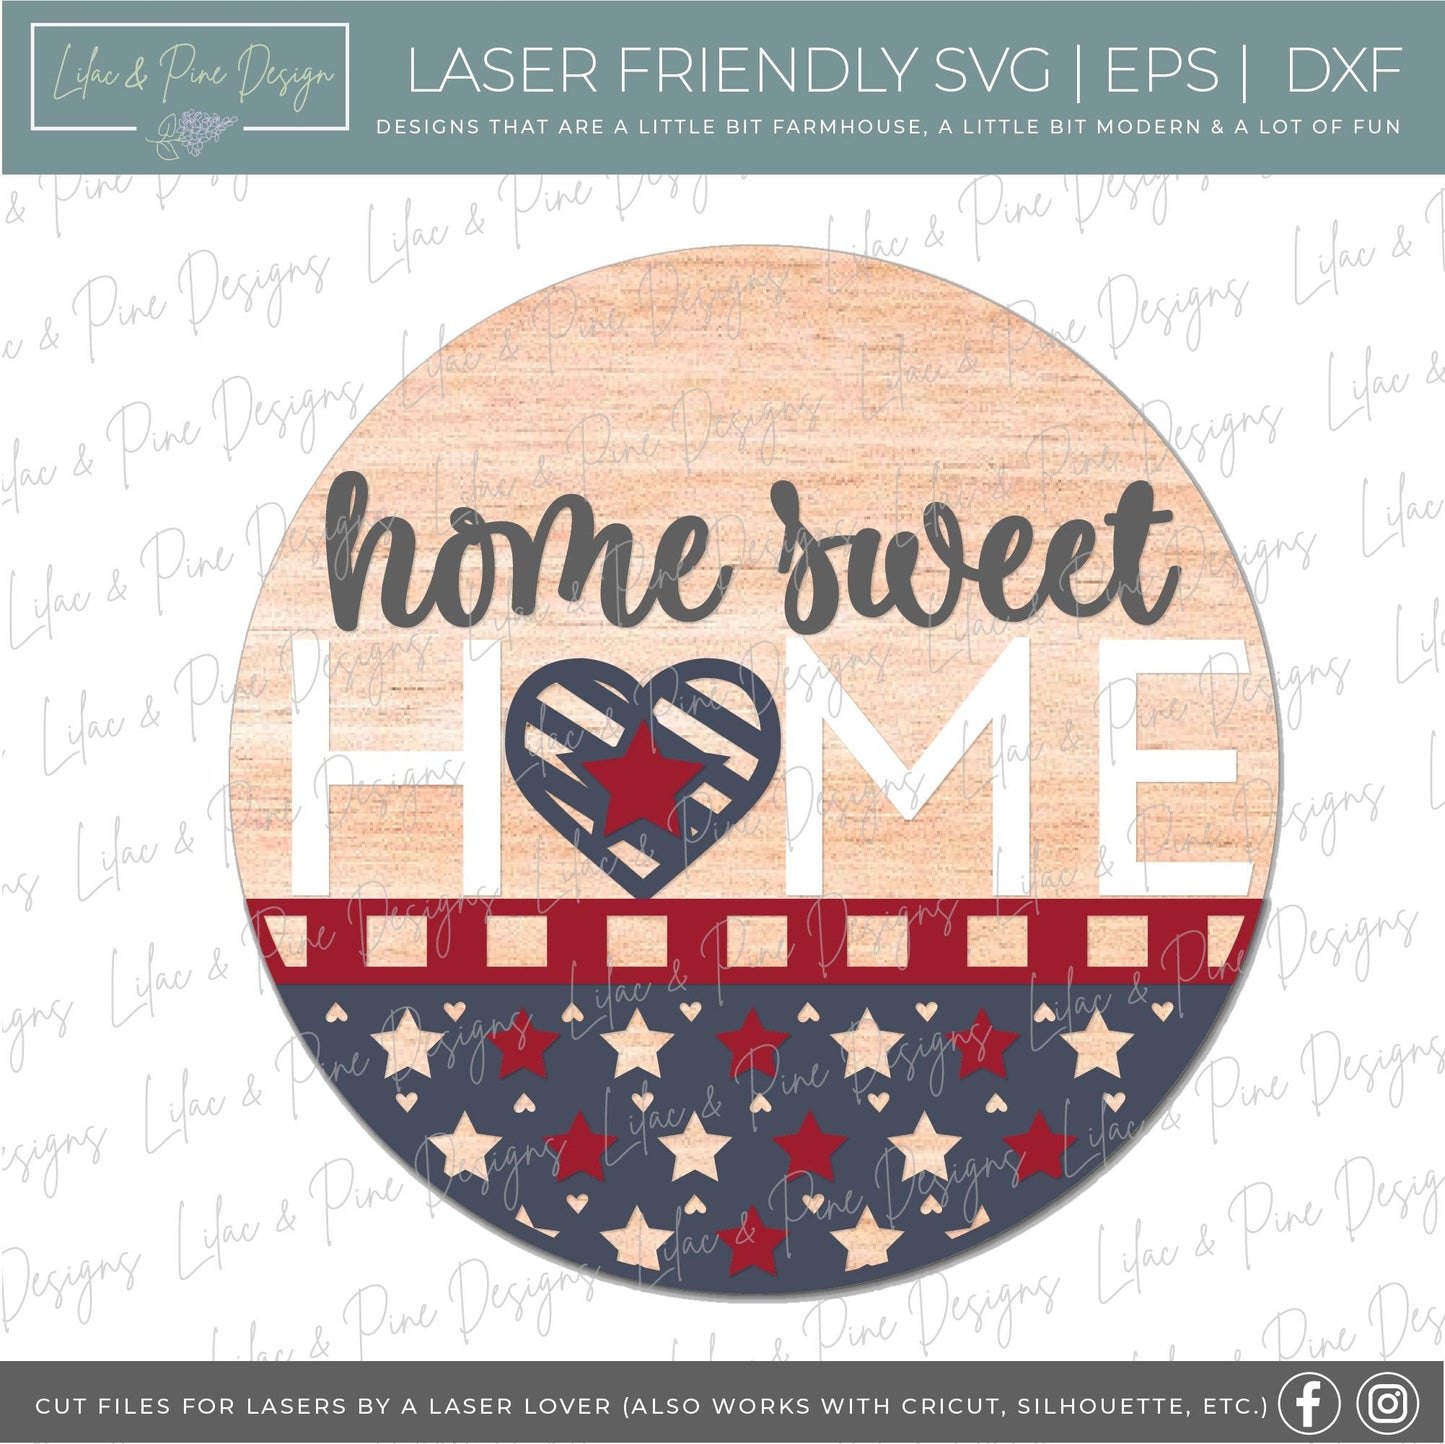 America home sweet home SVG, 4th of July welcome sign SVG, Fourth of July door hanger, Patriotic round sign, Glowforge SVG, laser cut file